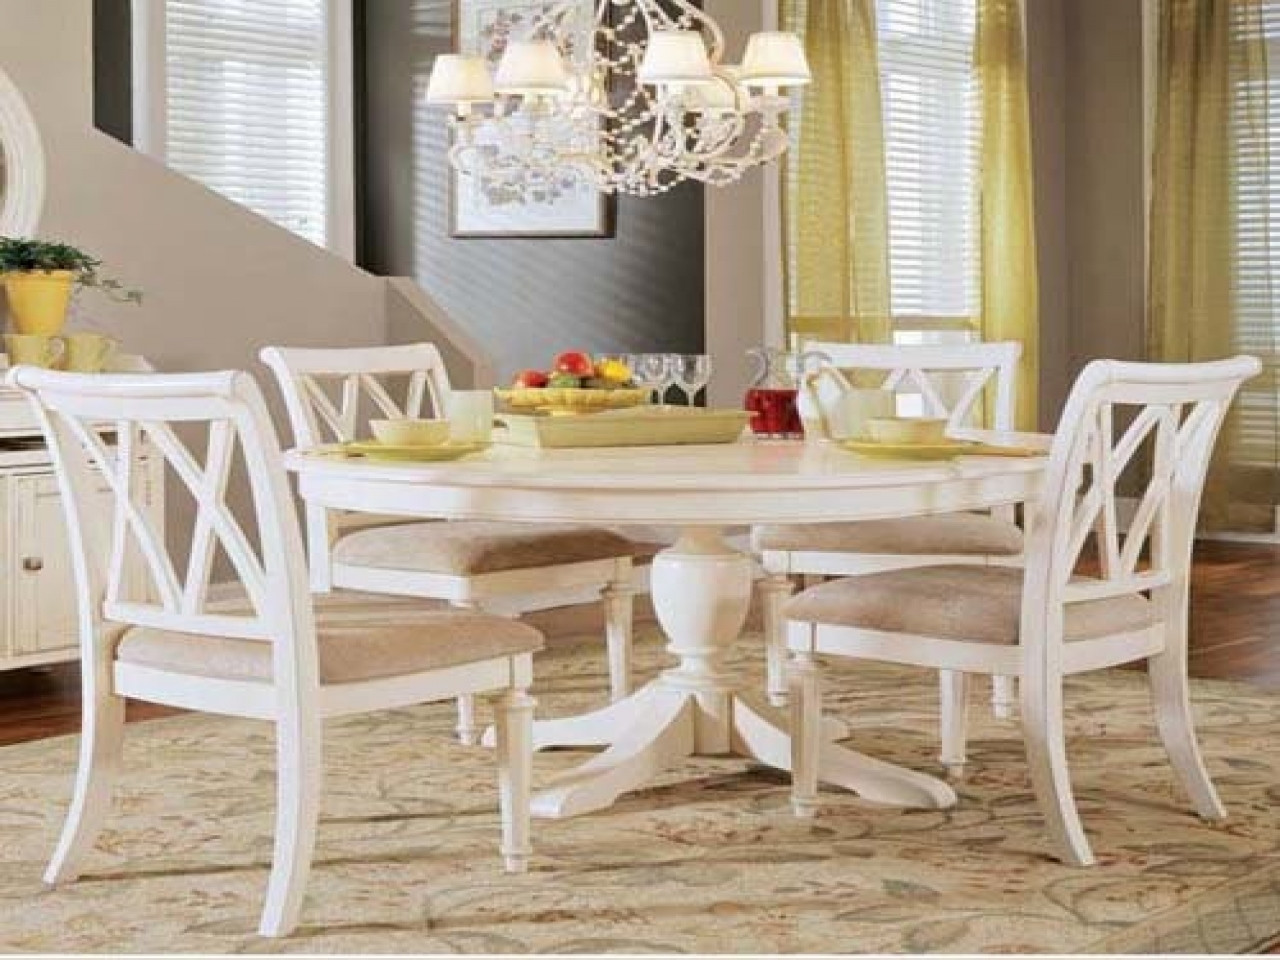 White Kitchen Table Chairs
 Dining tables small kitchen table and chairs walmart